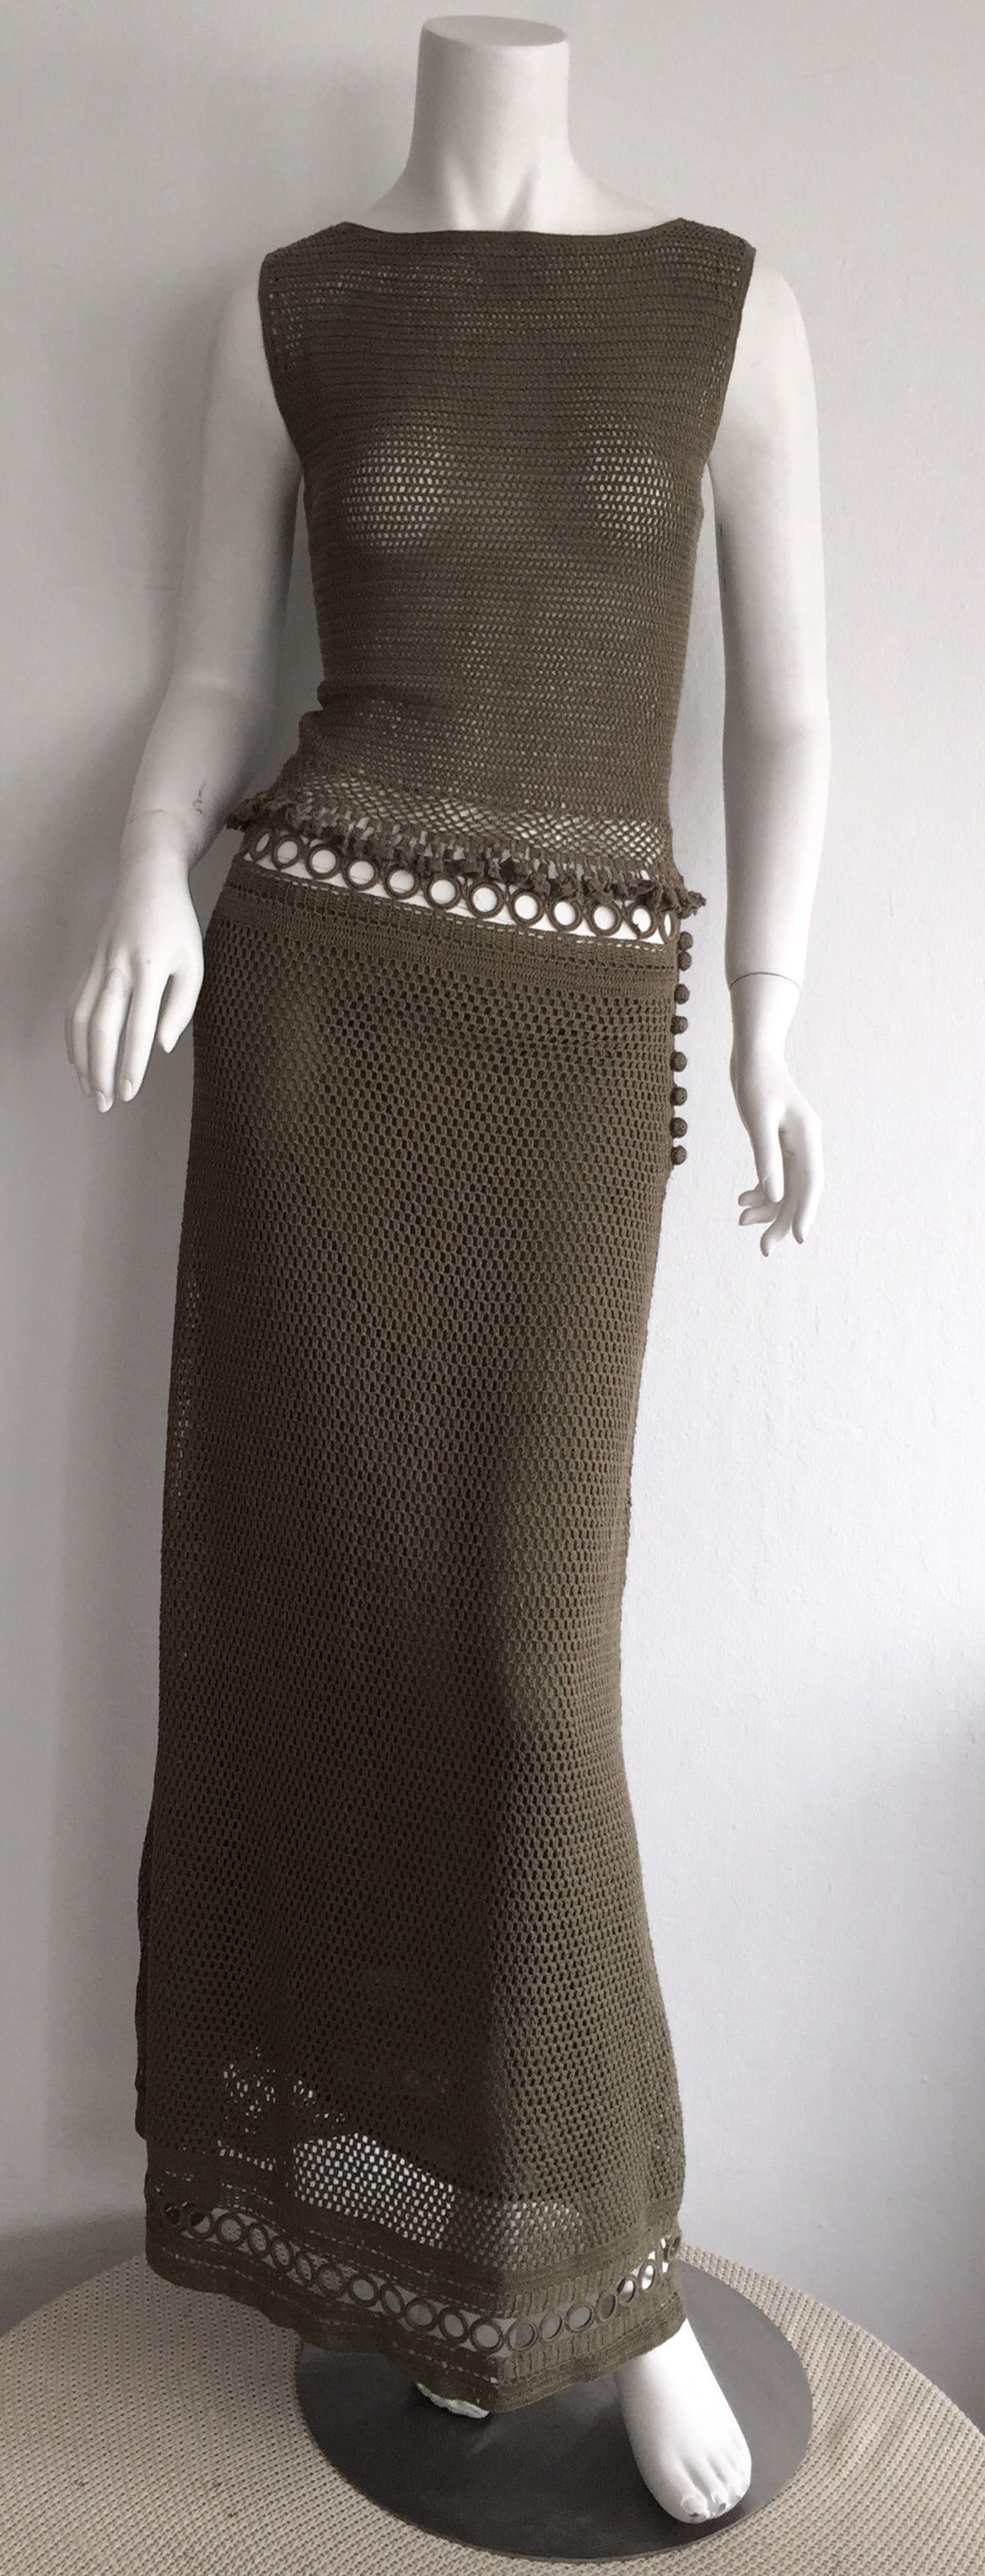 Incredible 1990s Philosophy d' Alberta Ferretti 2-piece top + skirt dress ensemble! Beautiful olive green cotton crochet, with cut-outs at skirt waistband, and blouse hem. Both pieces are easily worn as separates. Skirt can also be worn as a tube